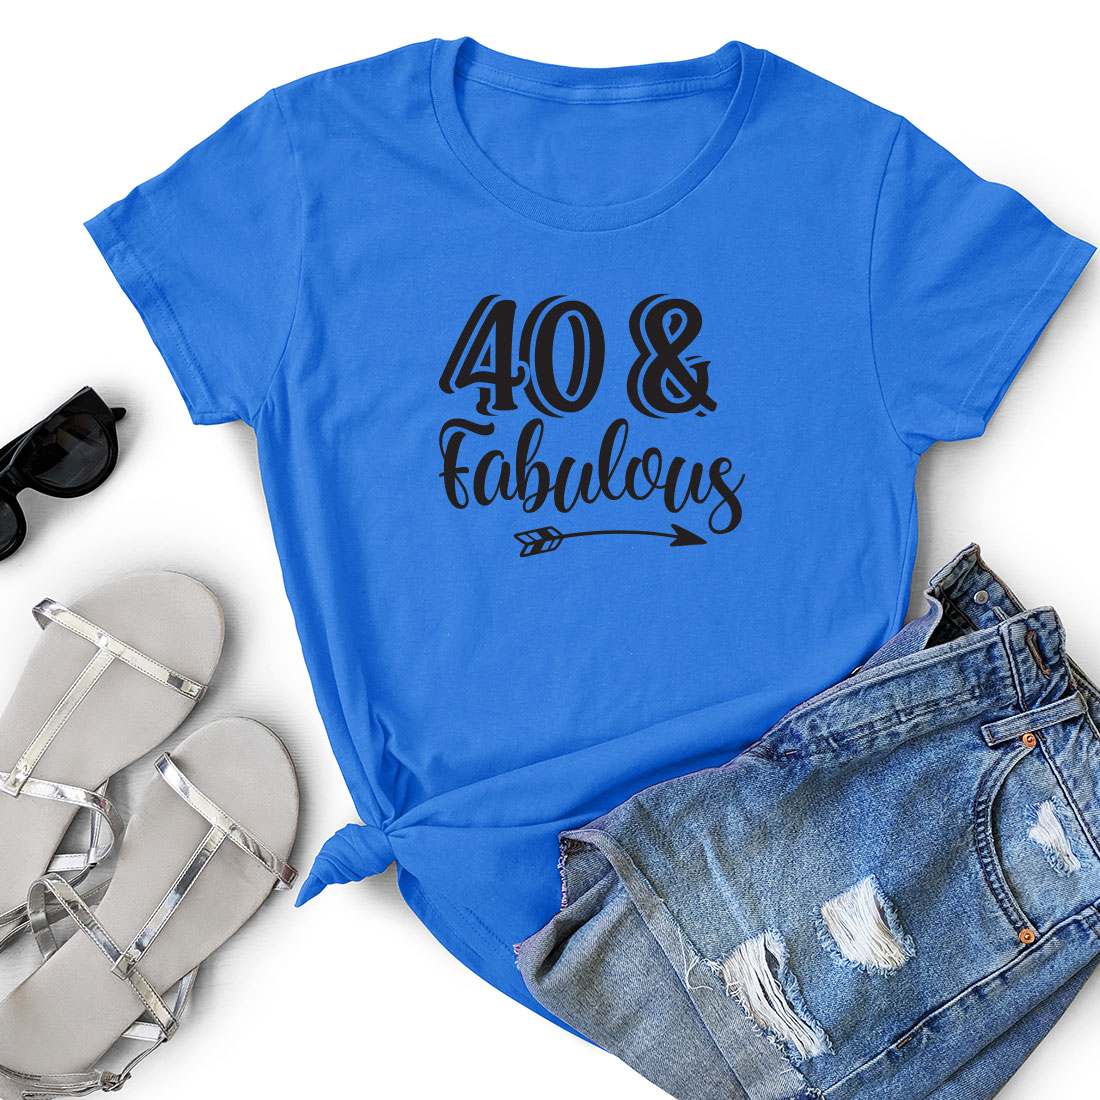 T - shirt that says 40 and fabulous next to a pair of shorts.